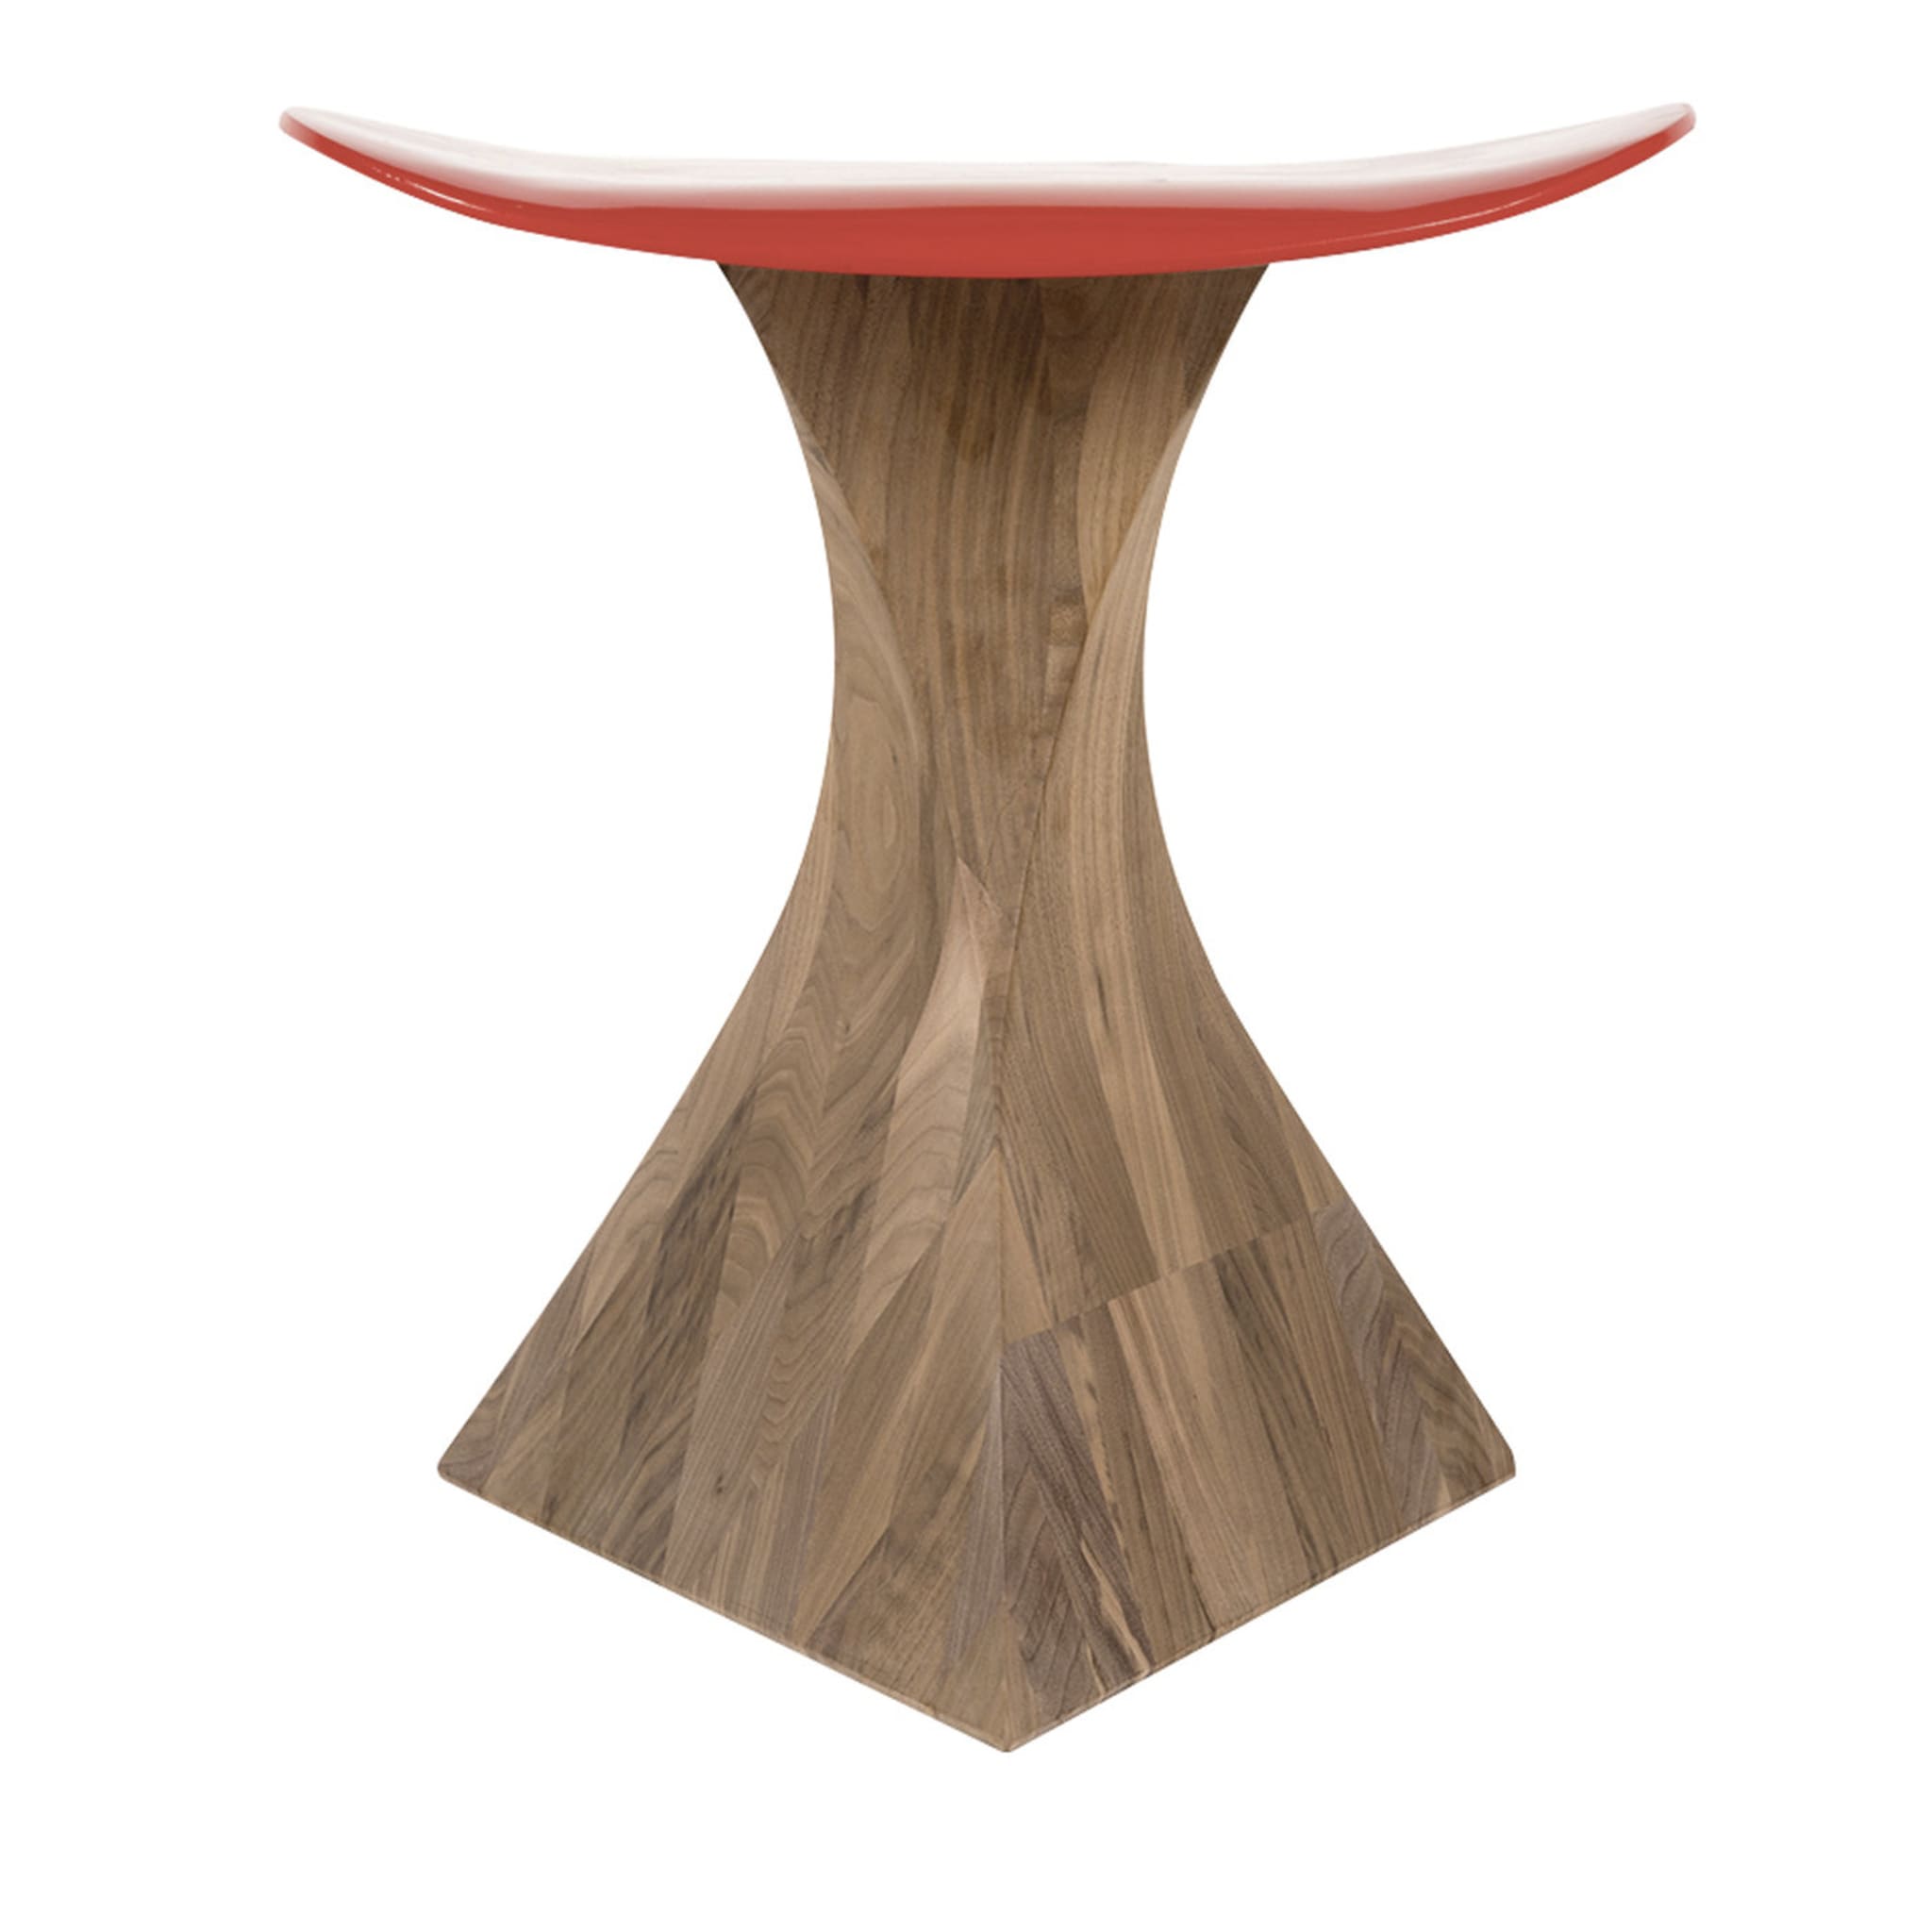 Audrey Red Stool by Mauro Dell'Orco - Main view